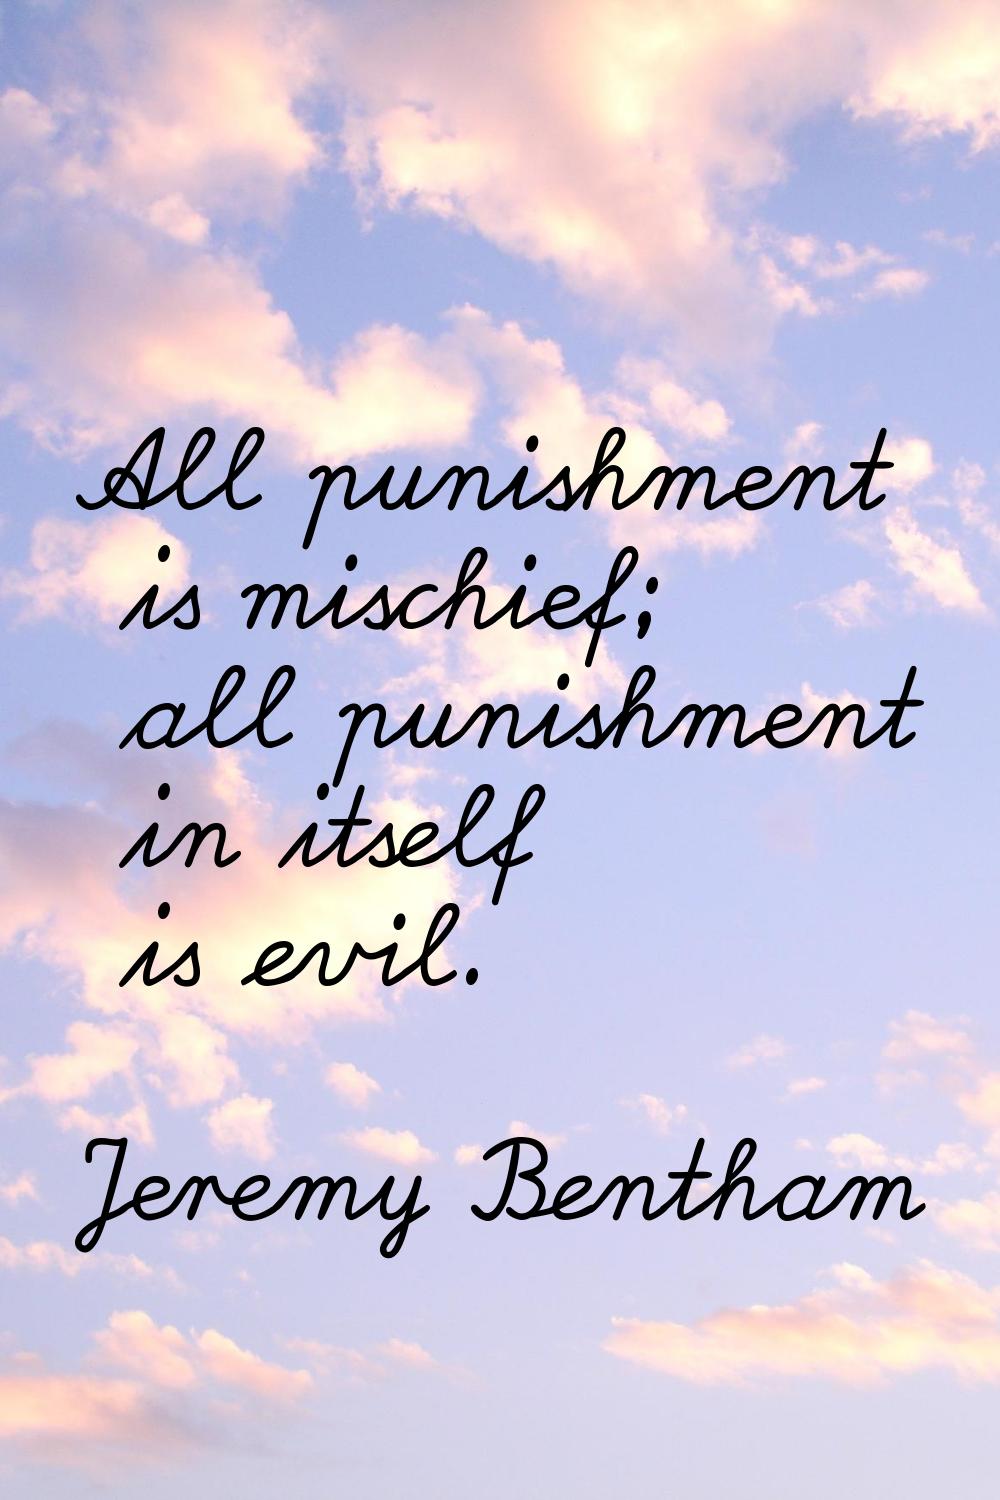 All punishment is mischief; all punishment in itself is evil.